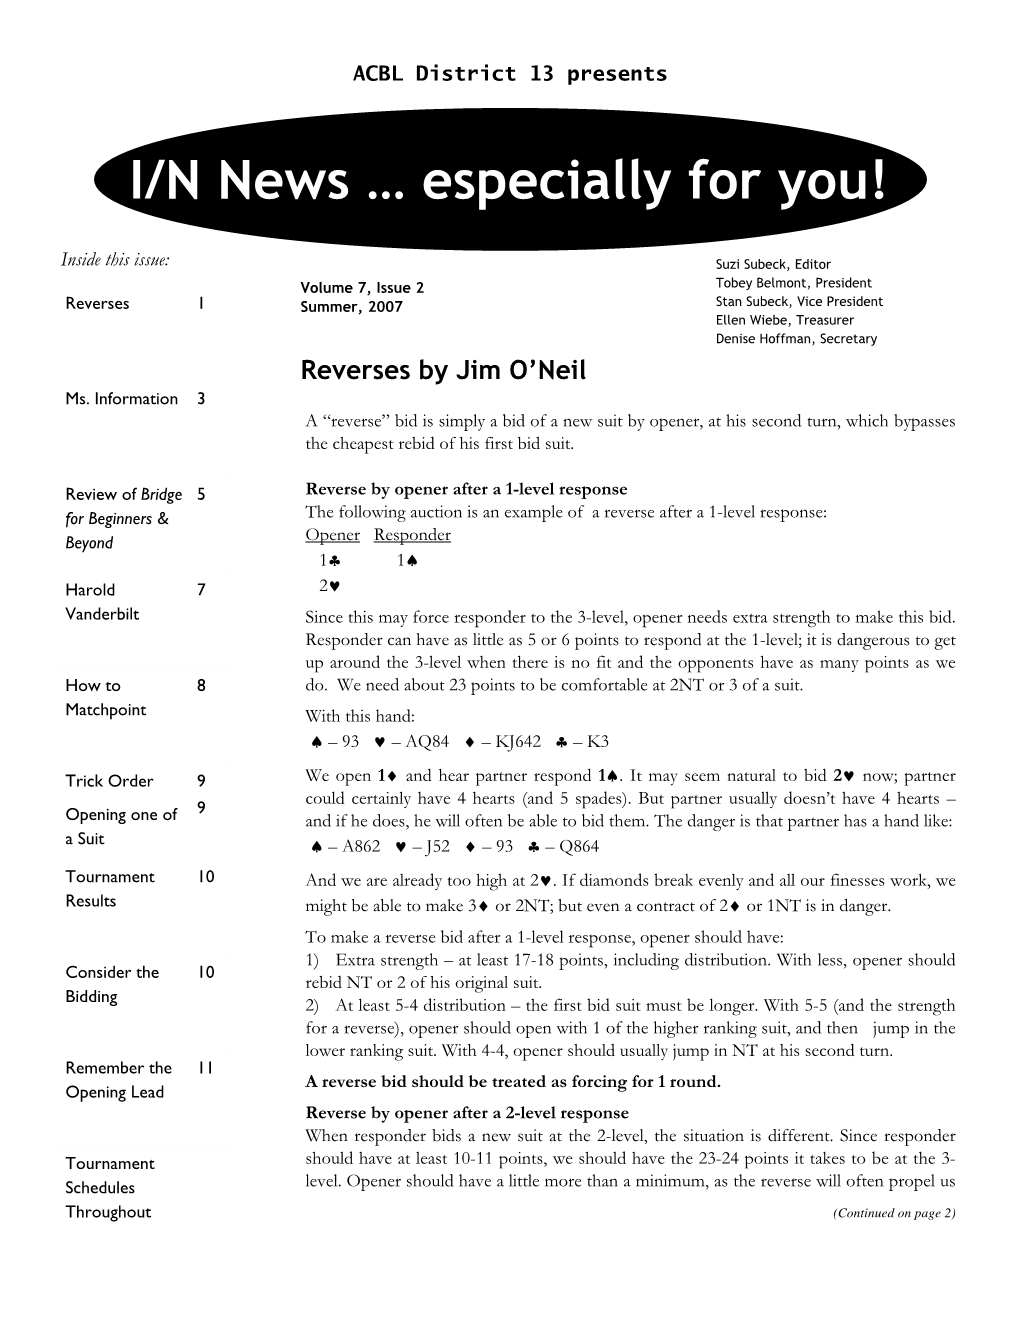 I/N News … Especially for You!